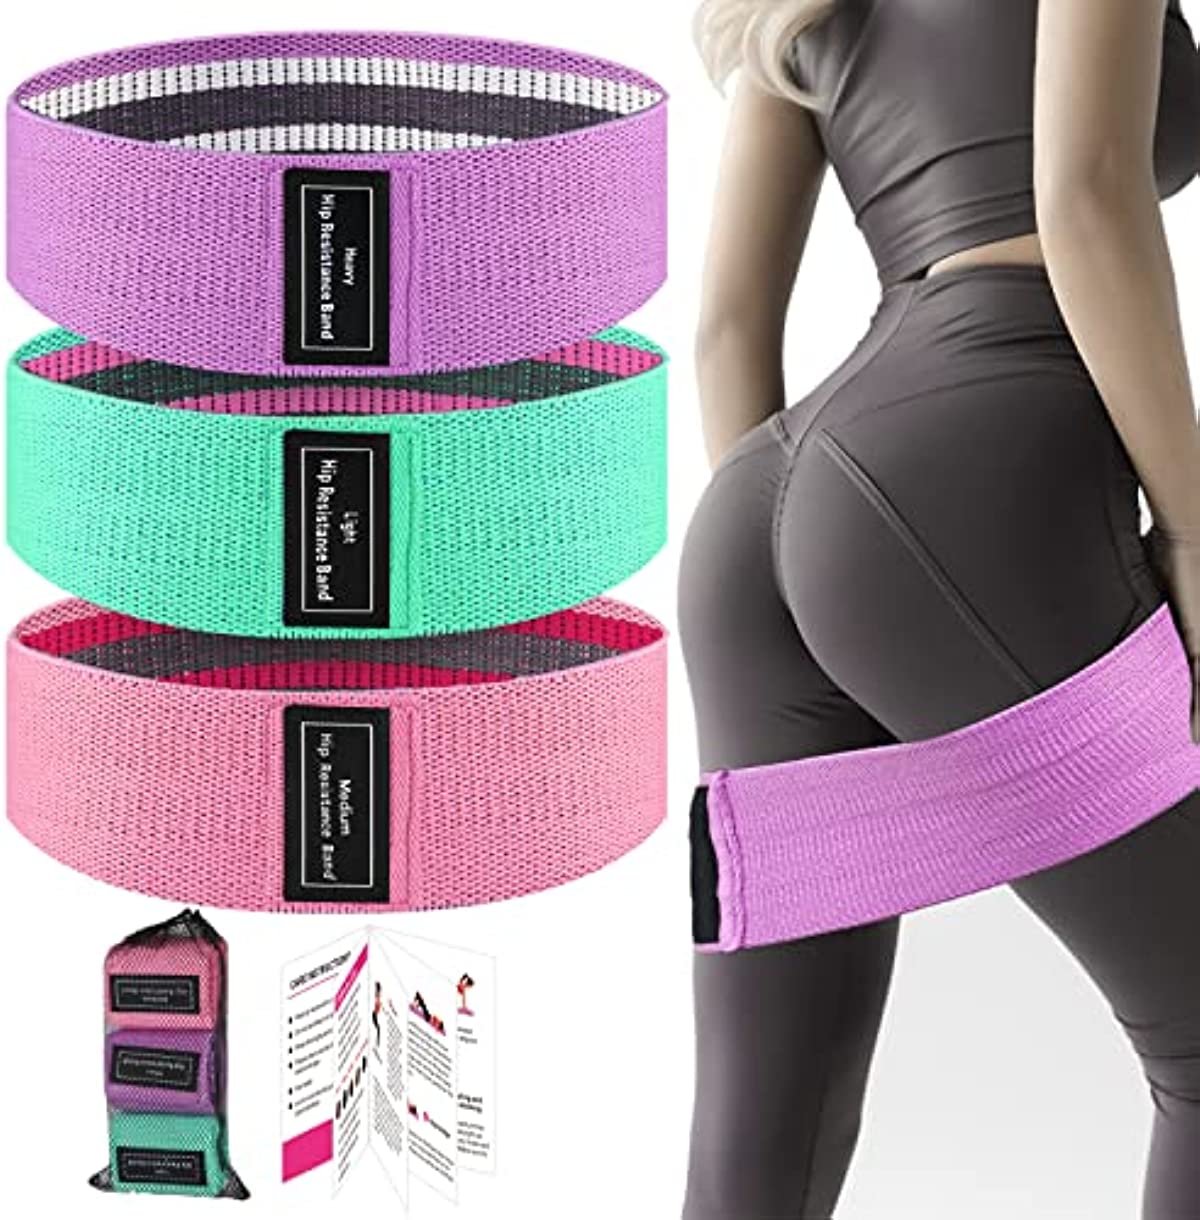 CHEANDEUL Resistance Band Fabric Exercise Bands, [Non Slip & Rolling] Resistance Bands, 3 Set Levels Workout Bands Booty Bands for Hip Butt Thigh Squat Fitness Stretch, Bandas Resistencia Pink